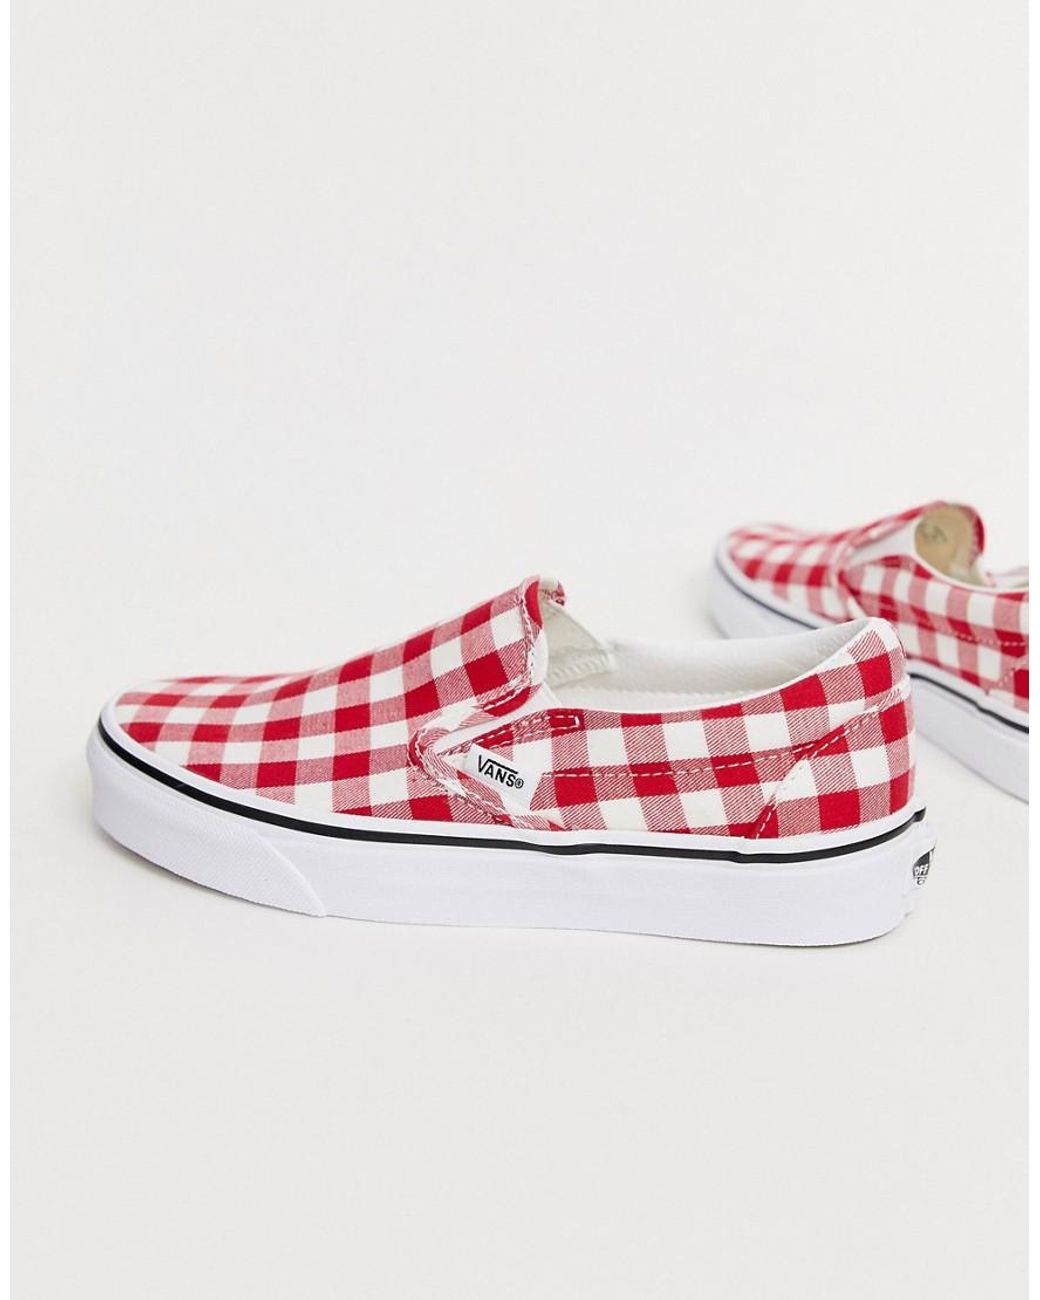 Vans Slip-on Red Gingham Trainers | Lyst